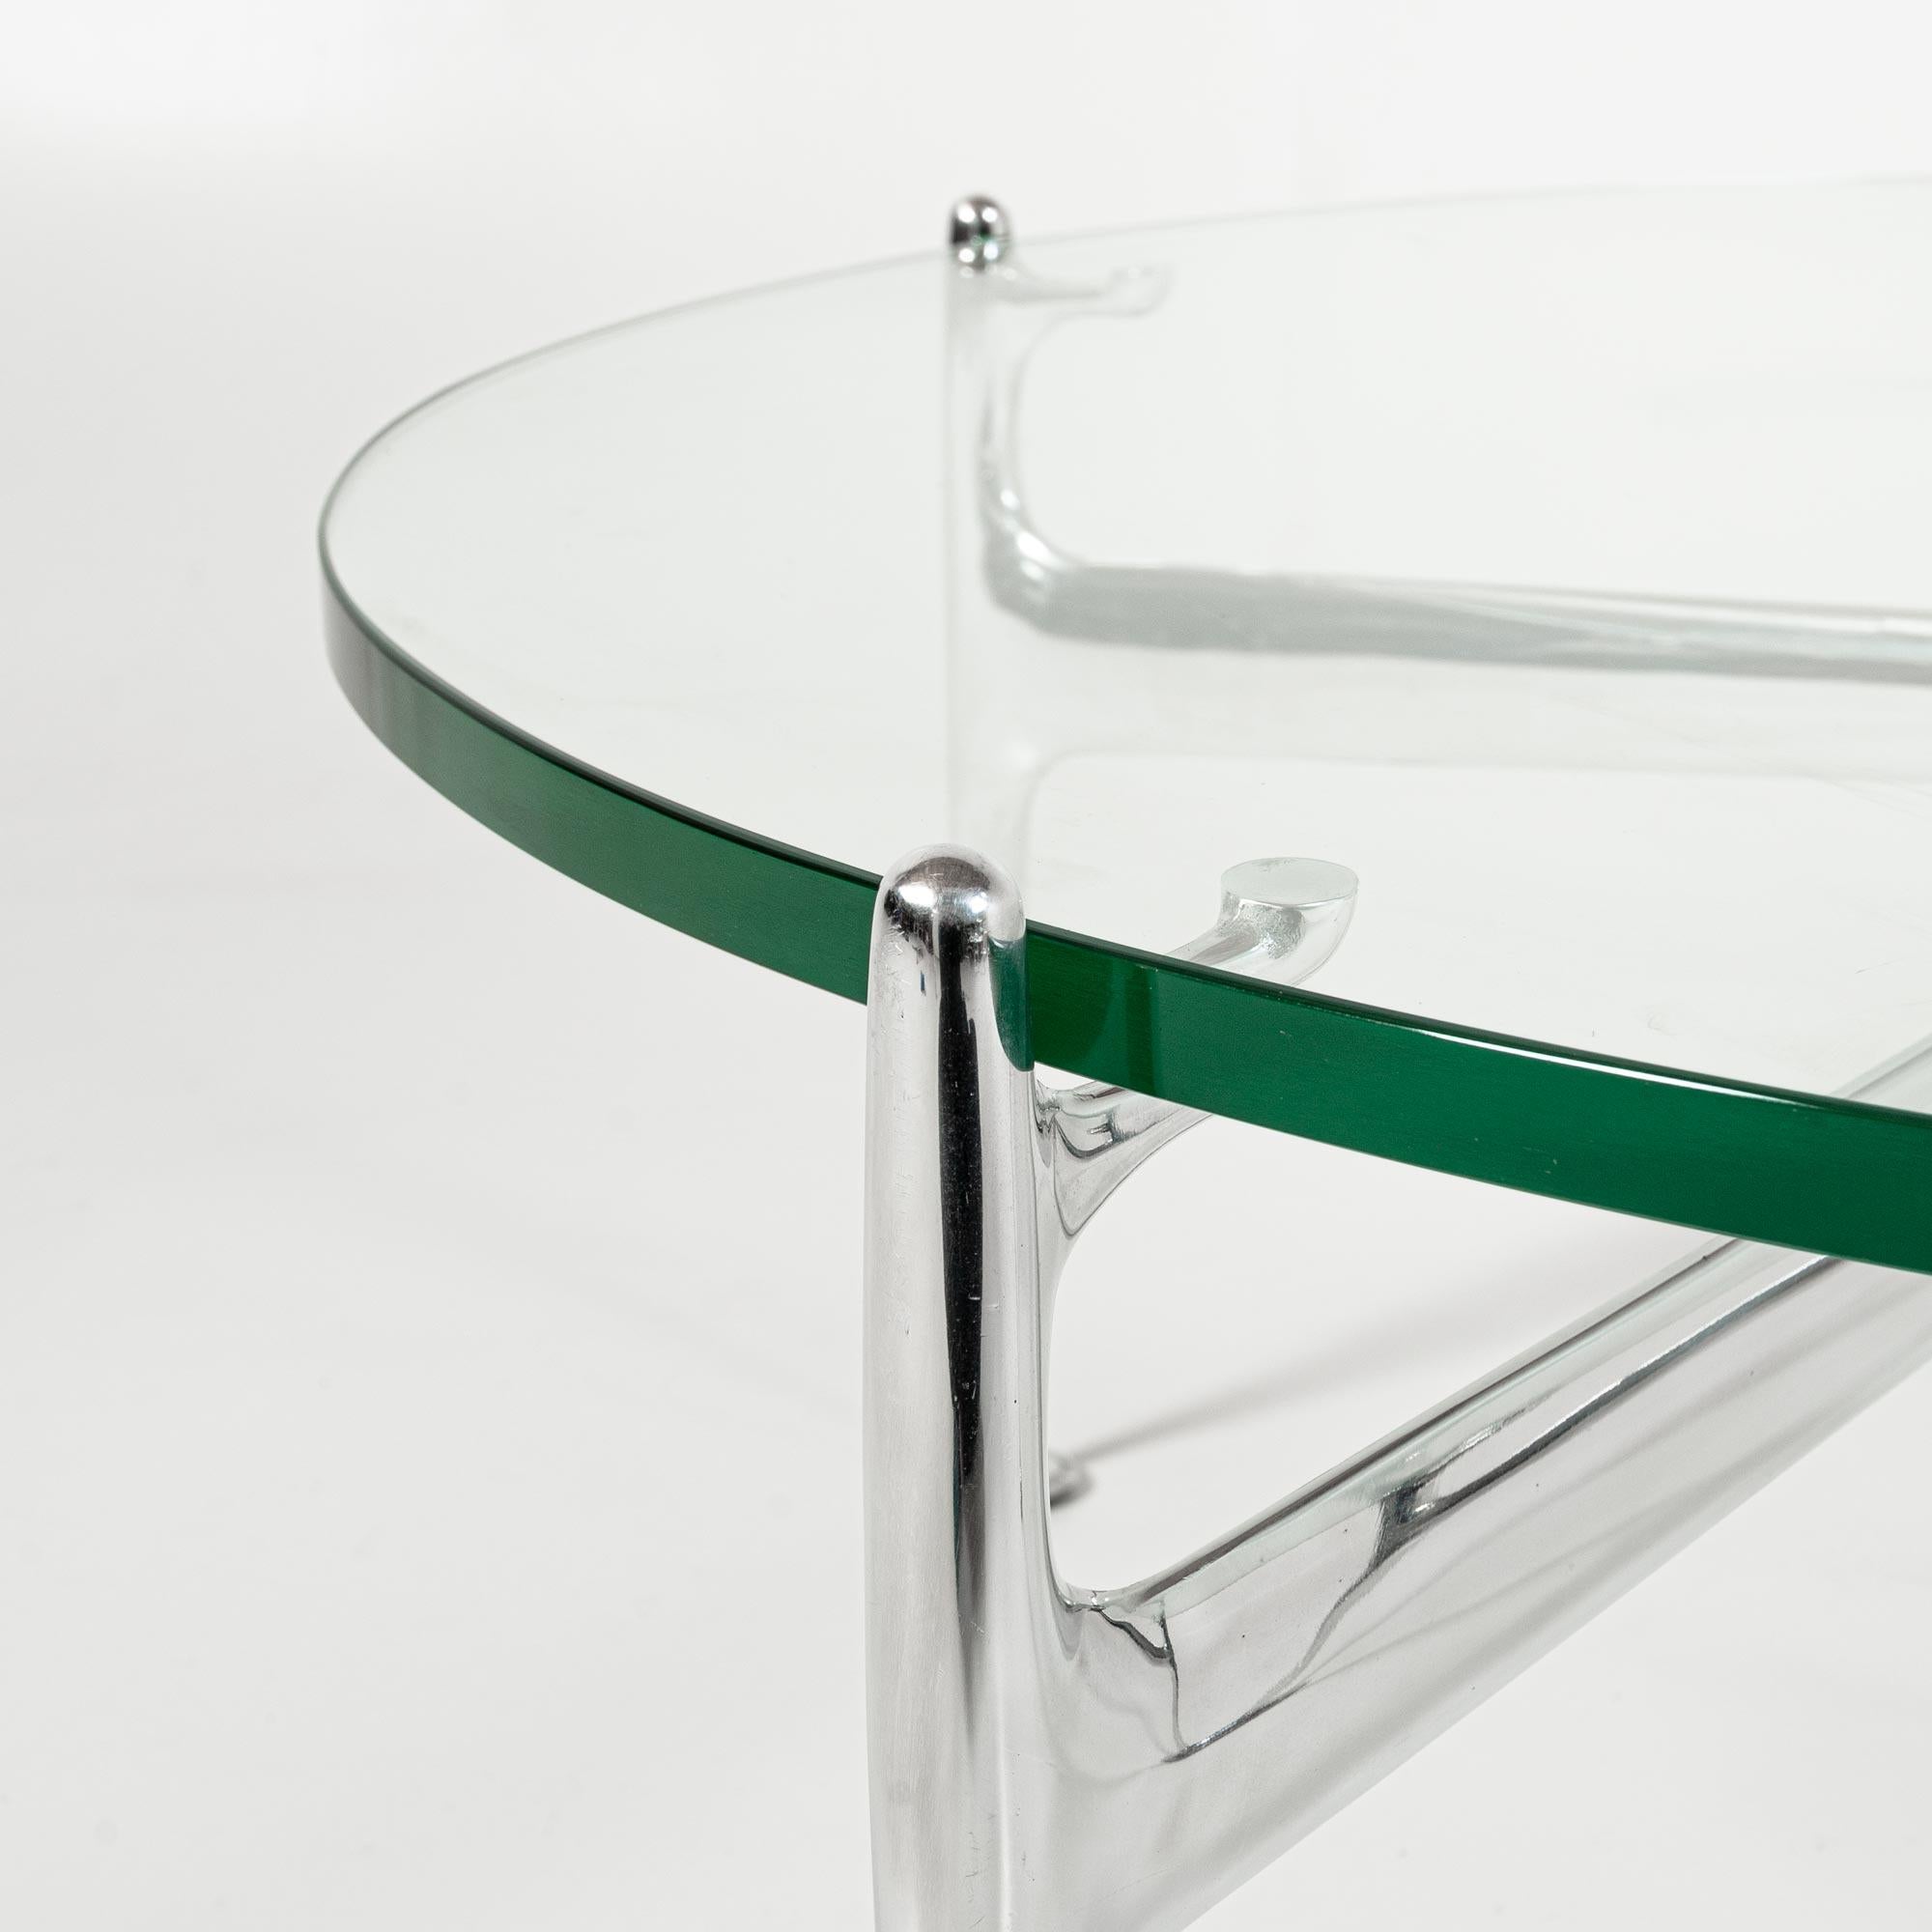 Aluminum 1965 Alexander Girard for Braniff Airlines & Herman Miller Glass Coffee Table For Sale